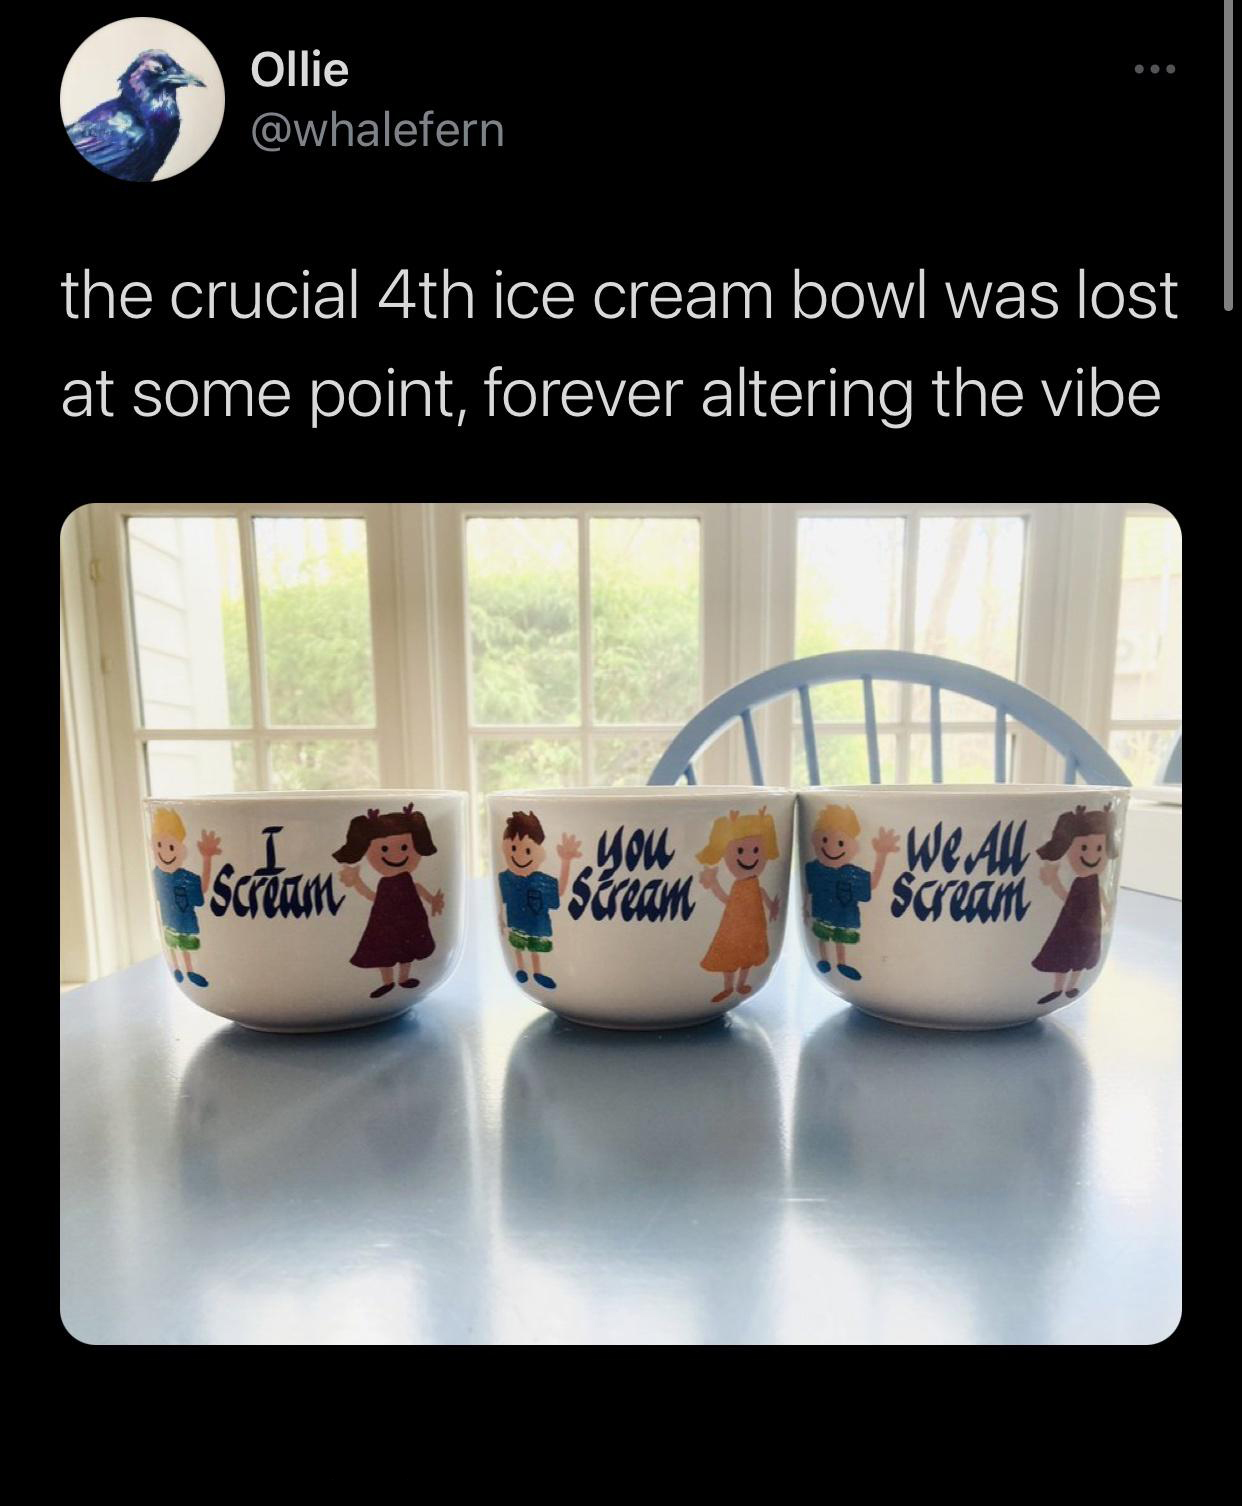 funny tweets - crucial 4th ice cream bowl - Ollie the crucial 4th ice cream bowl was lost at some point, forever altering the vibe Scream wou Scream We All Scream